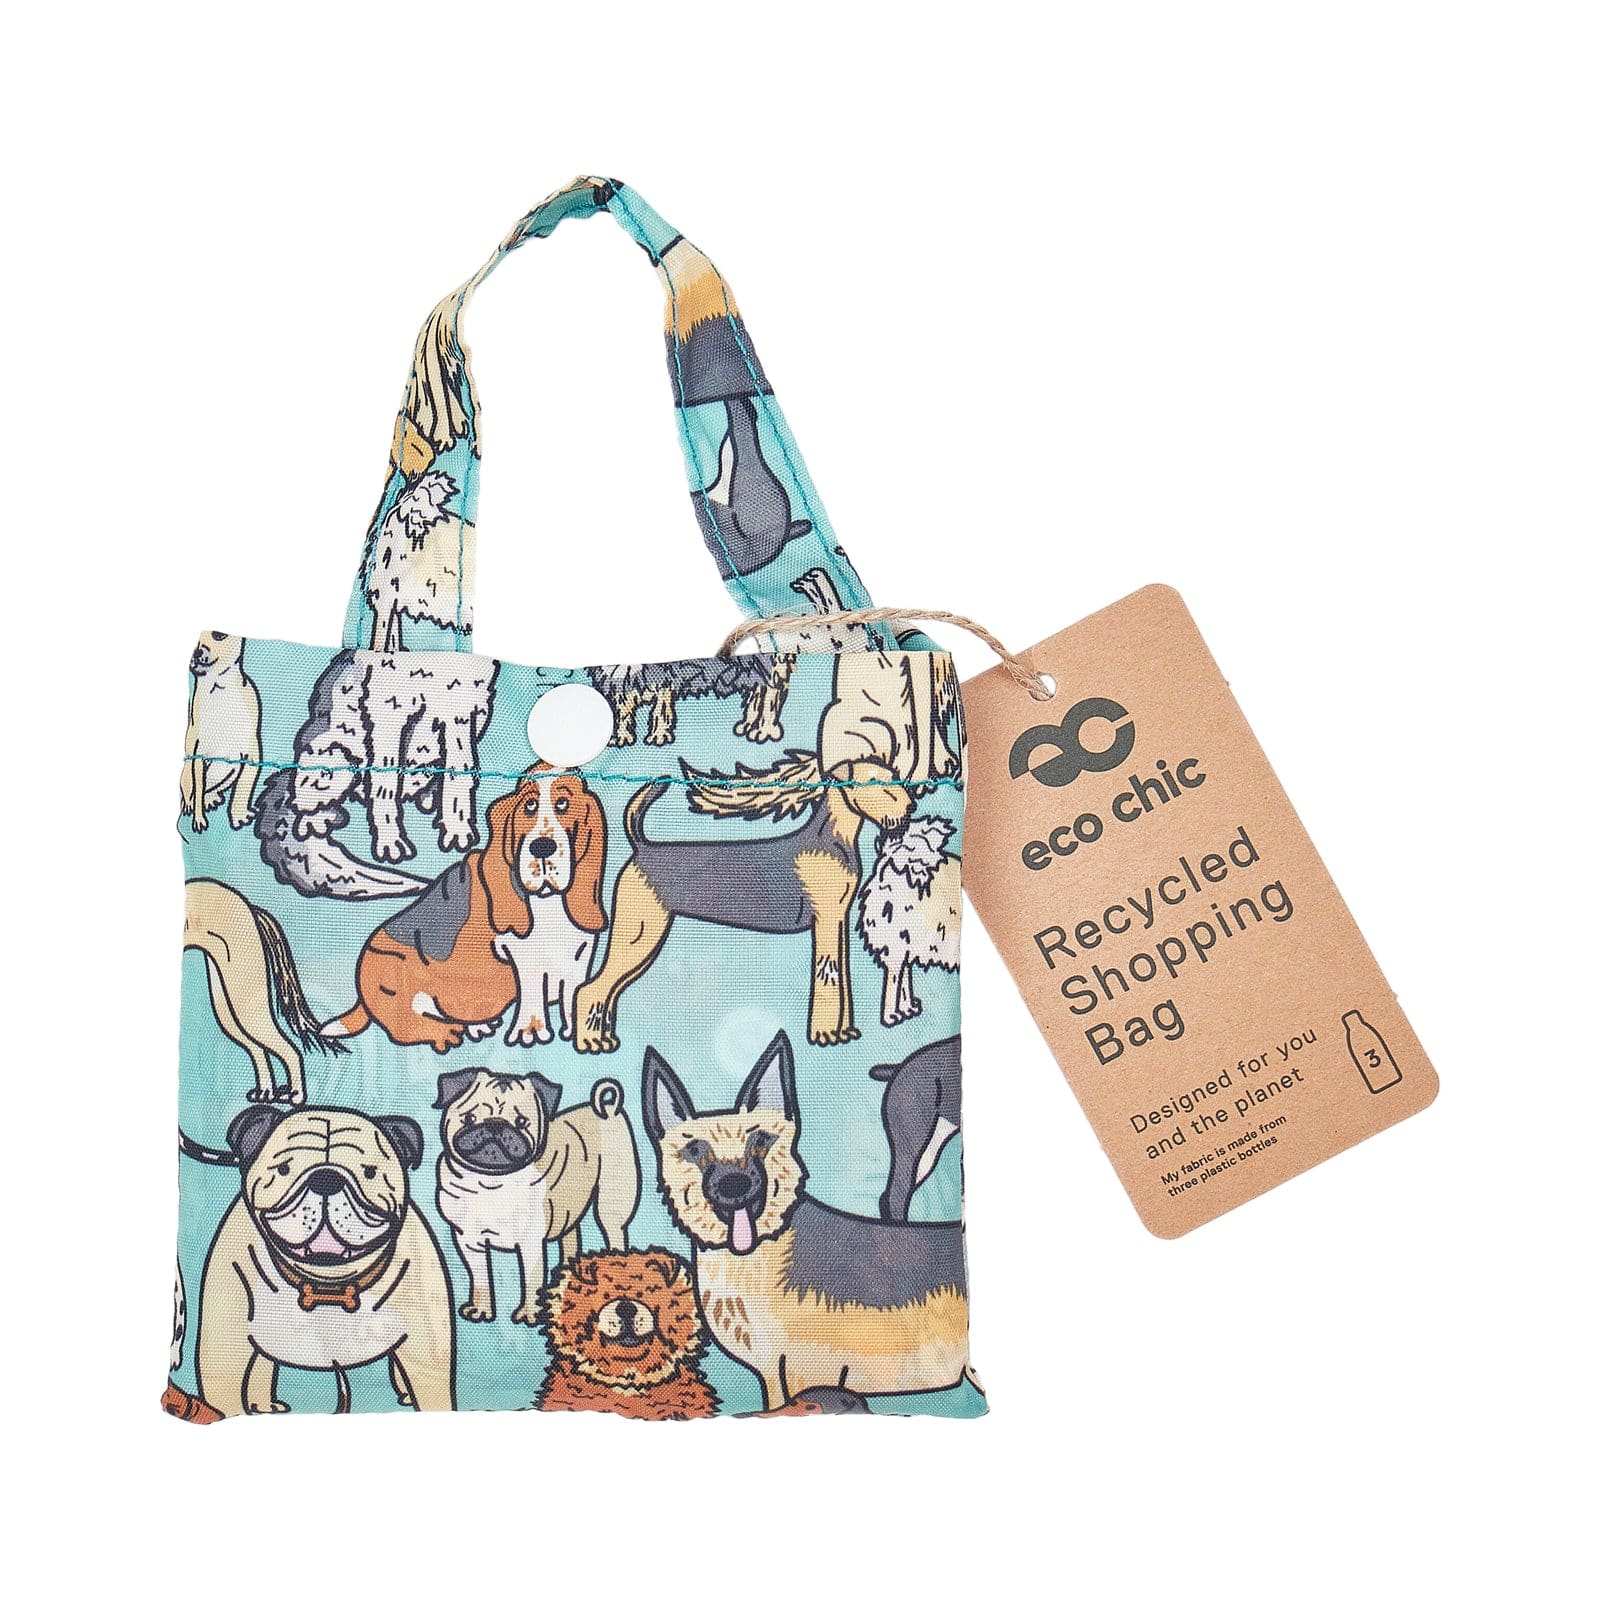 Eco Chic Eco Chic Lightweight Foldable Reusable Shopping Bag Dogs